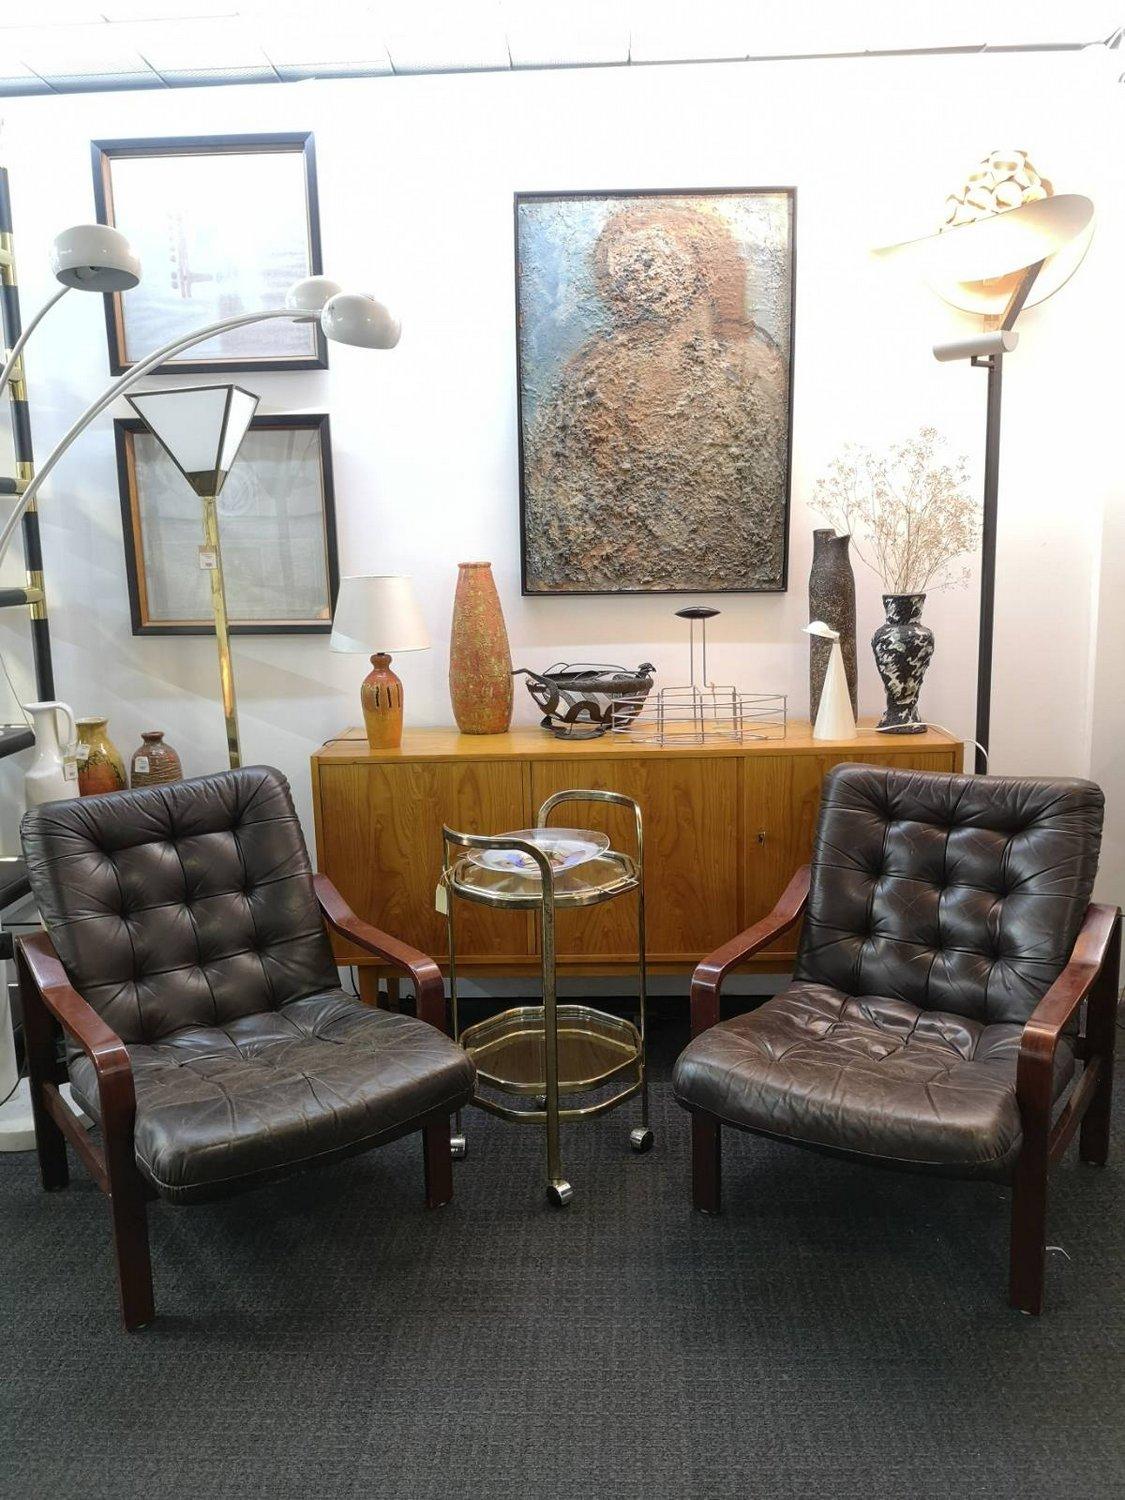 Small size brown leather armchairs from the 1970's. The leather upholstery aged very nicely, there are no tears, only slightly scarred. These chairs are super comfortable.